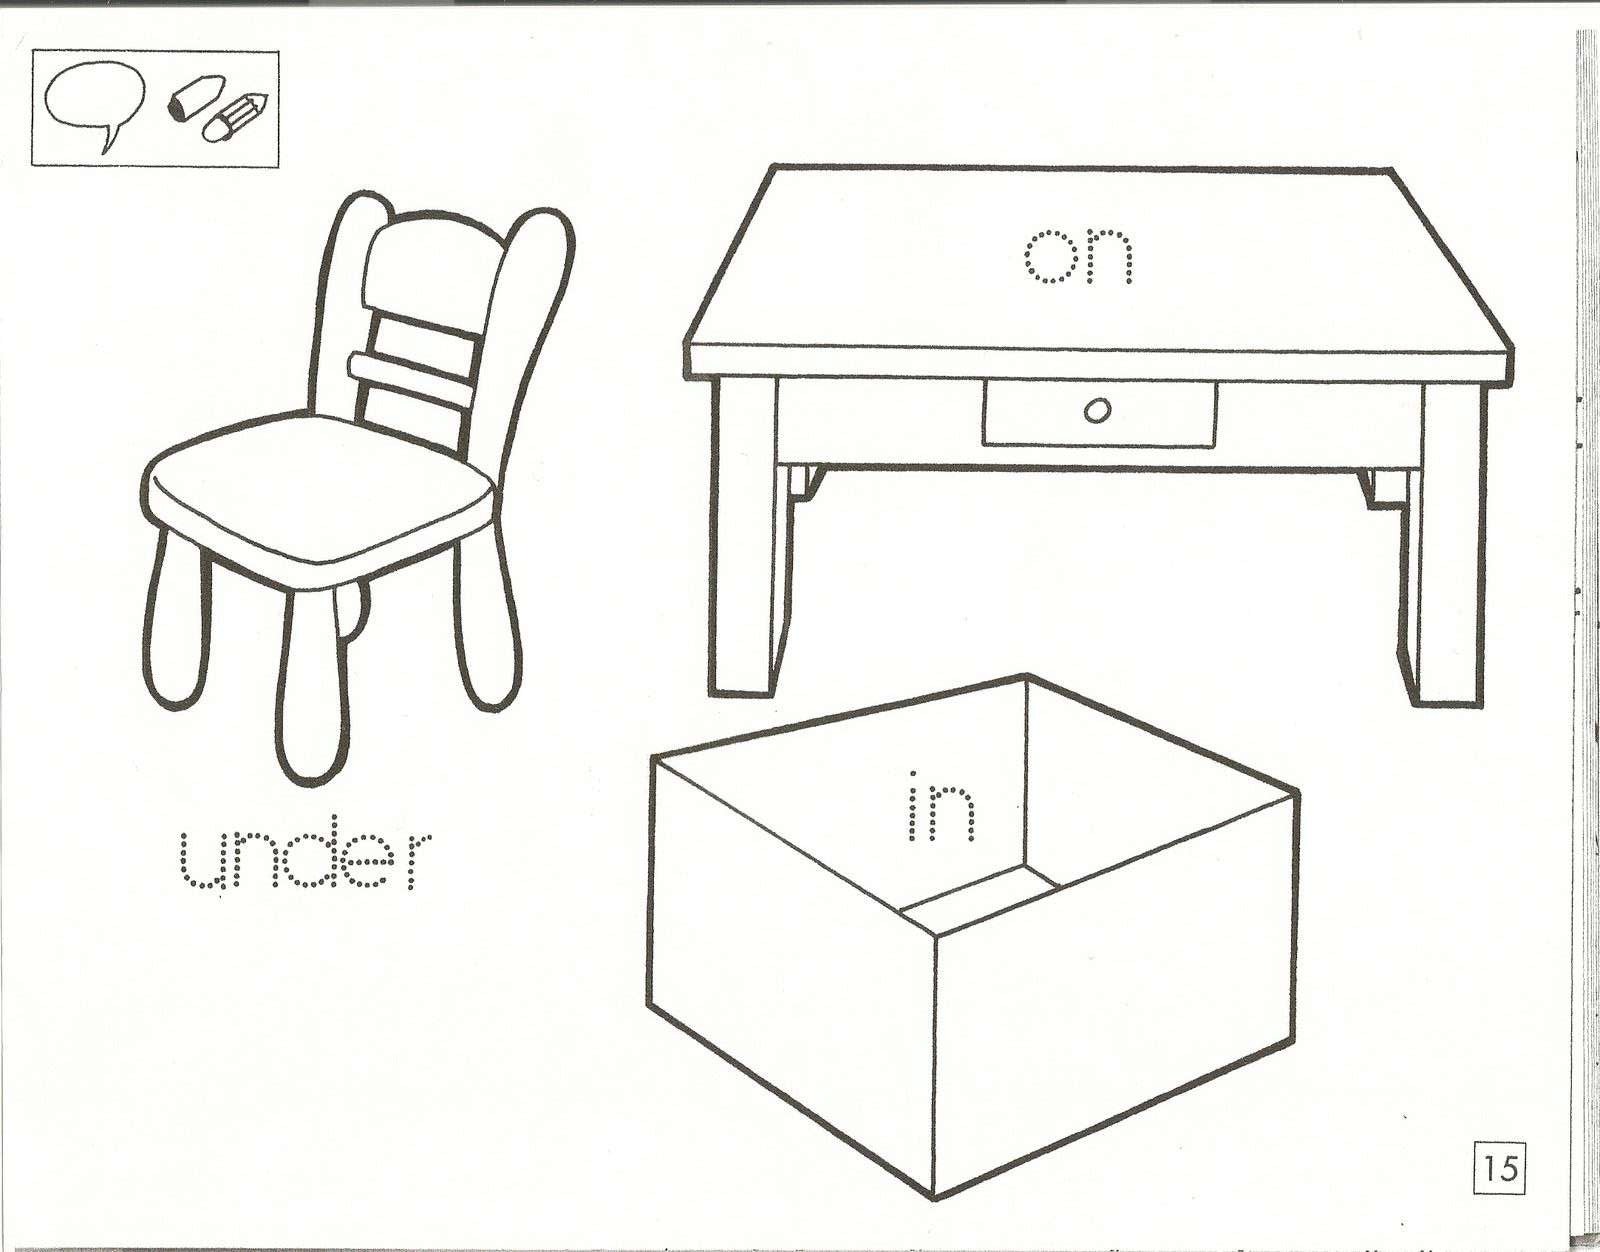 Next the chair. Предлоги in on under Worksheets for Kids. Предлоги in on under next to Worksheets. Предлоги in on under by Worksheet. Prepositions on in under for Kids.